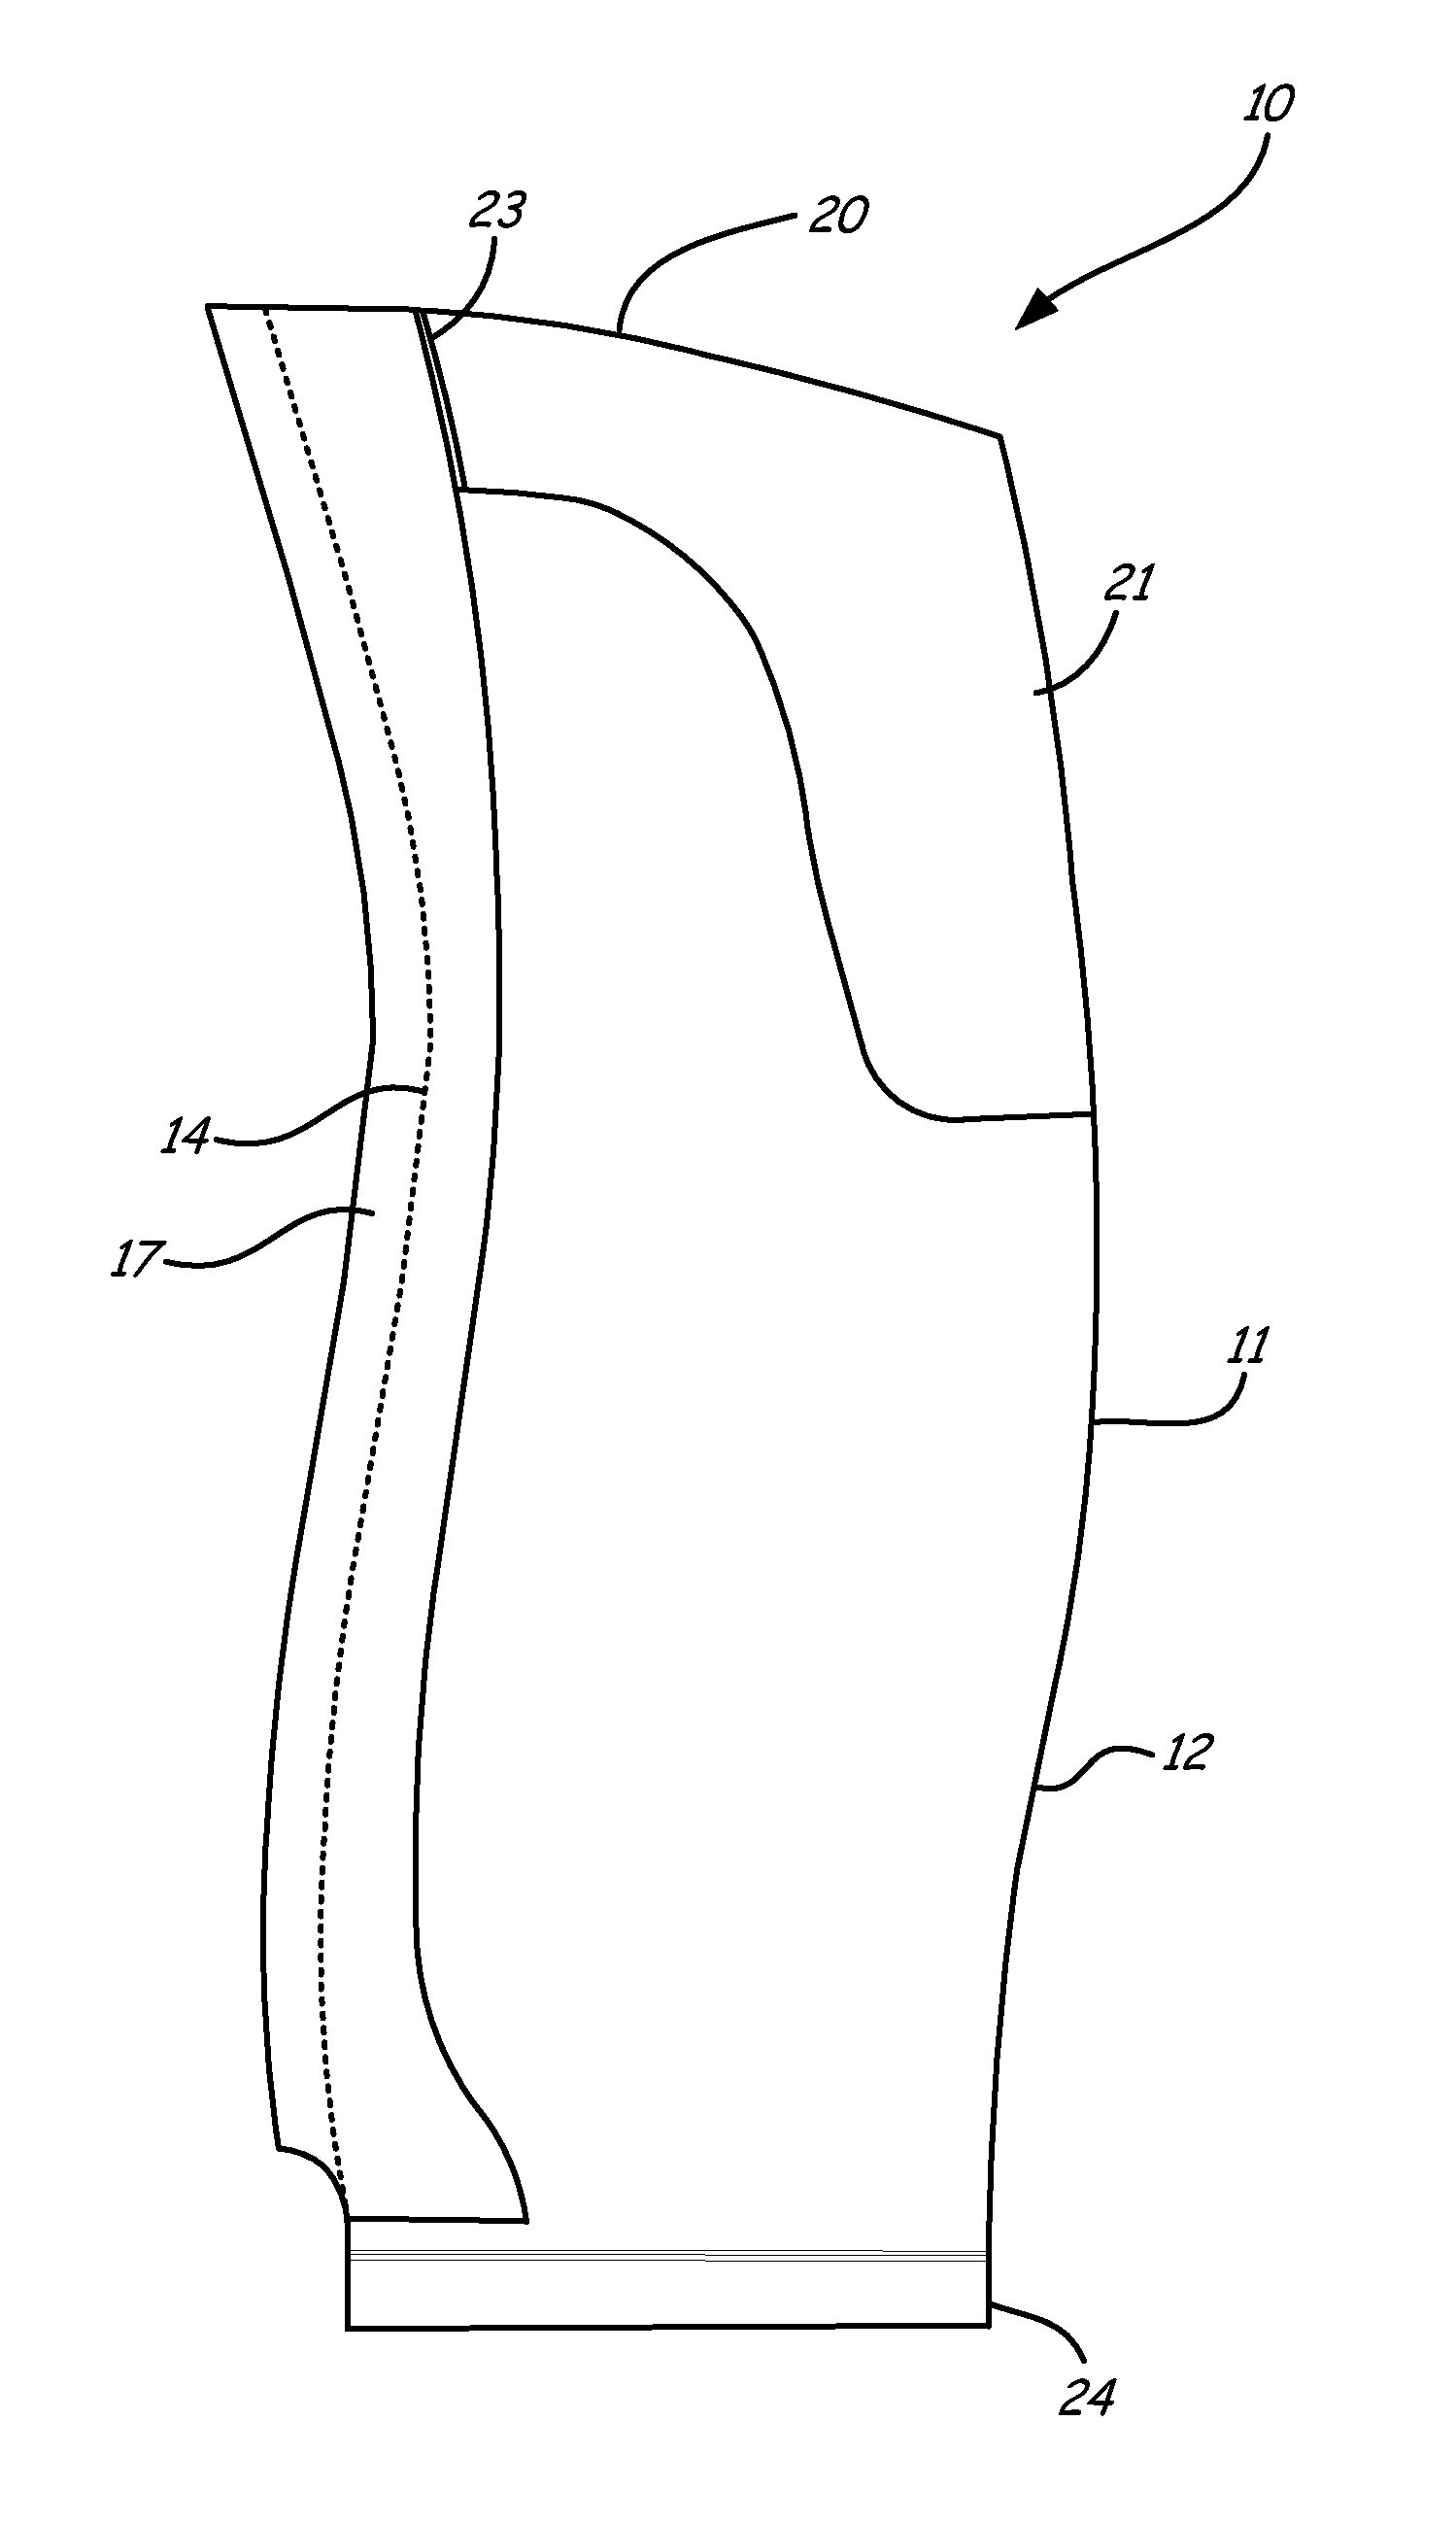 Co-cured sheath for composite blade